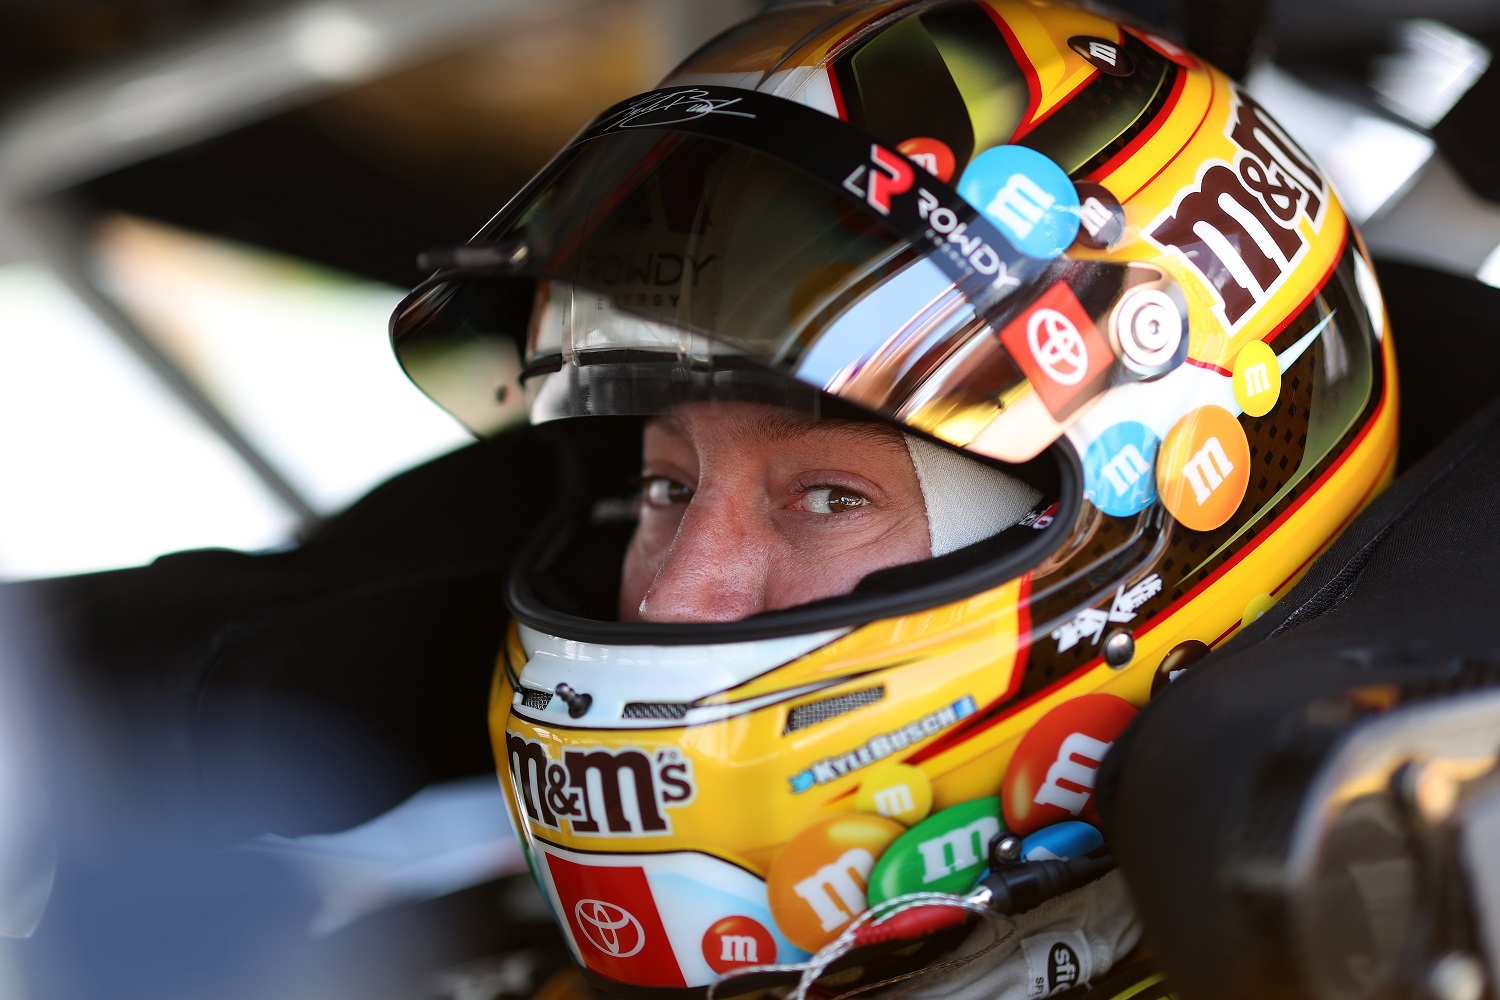 Kyle Busch sits in his Toyota during qualifying for the NASCAR Cup Series Goodyear 400 at Darlington Raceway on May 7, 2022.